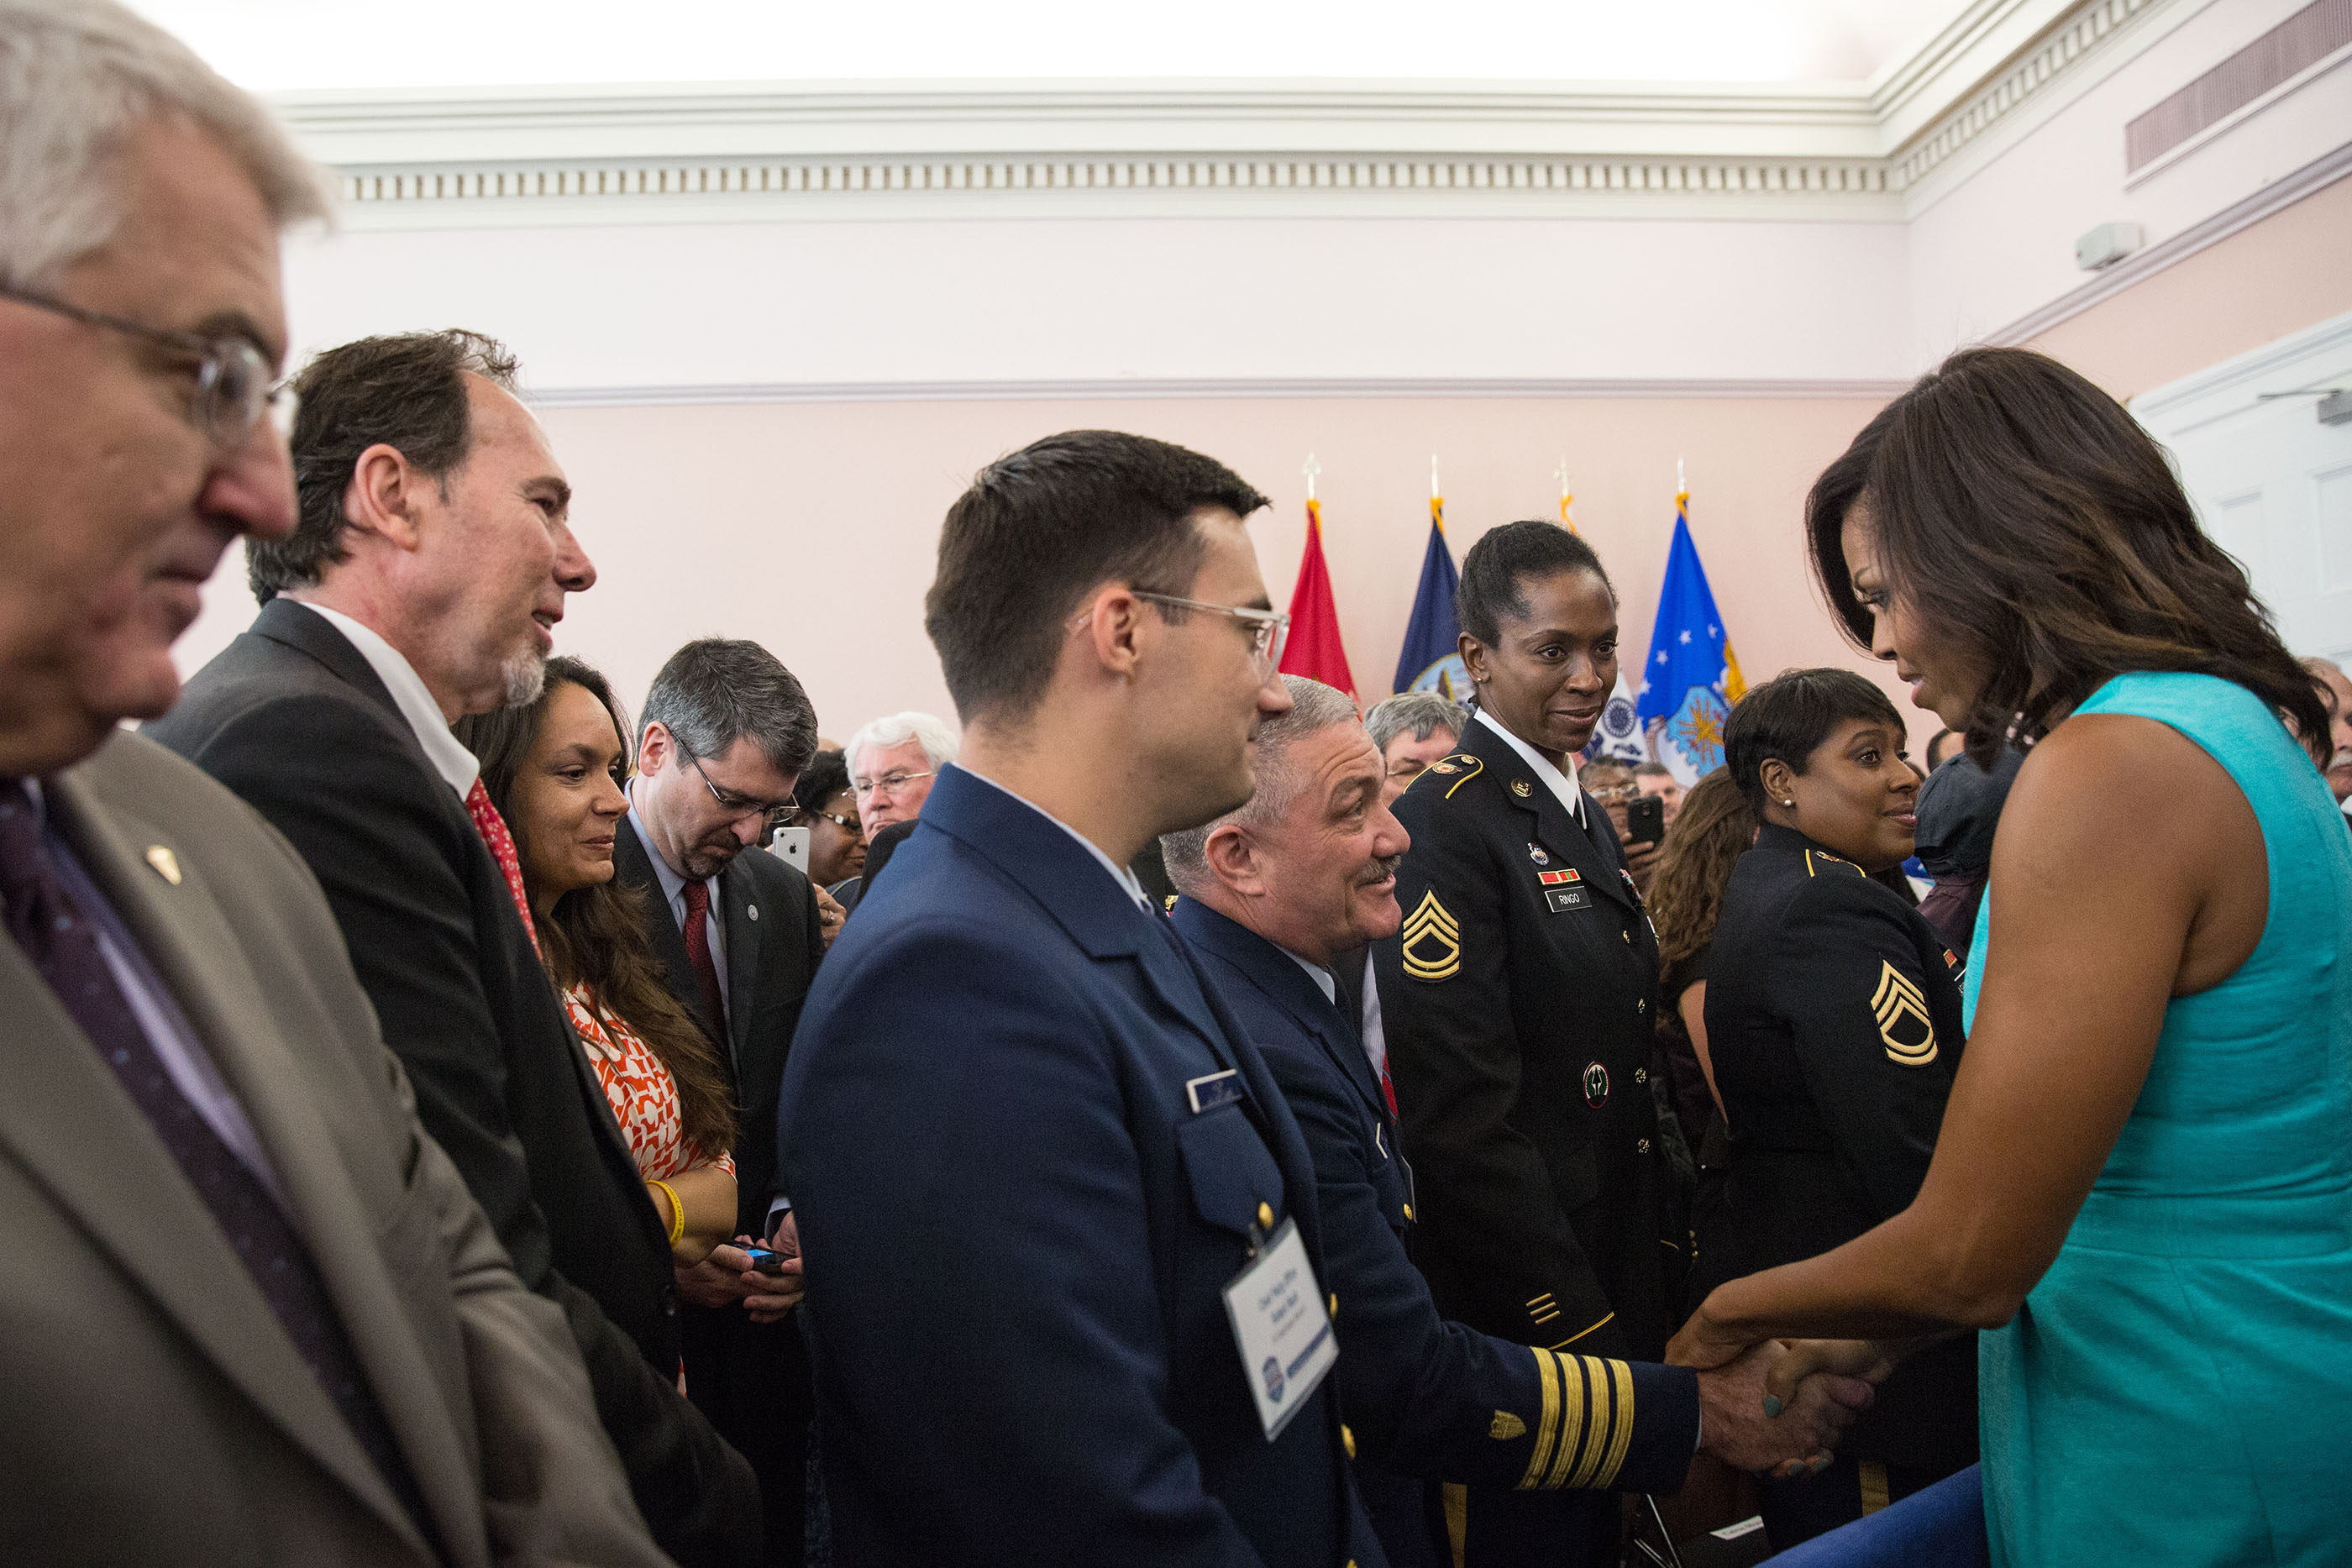 The First Lady greets veterans in the audience after delivering remarks at the “Mayor's Challenge to End Veteran Homelessness” in New Orleans, La., April 20, 2015. (Official White House Photo by Amanda Lucidon)